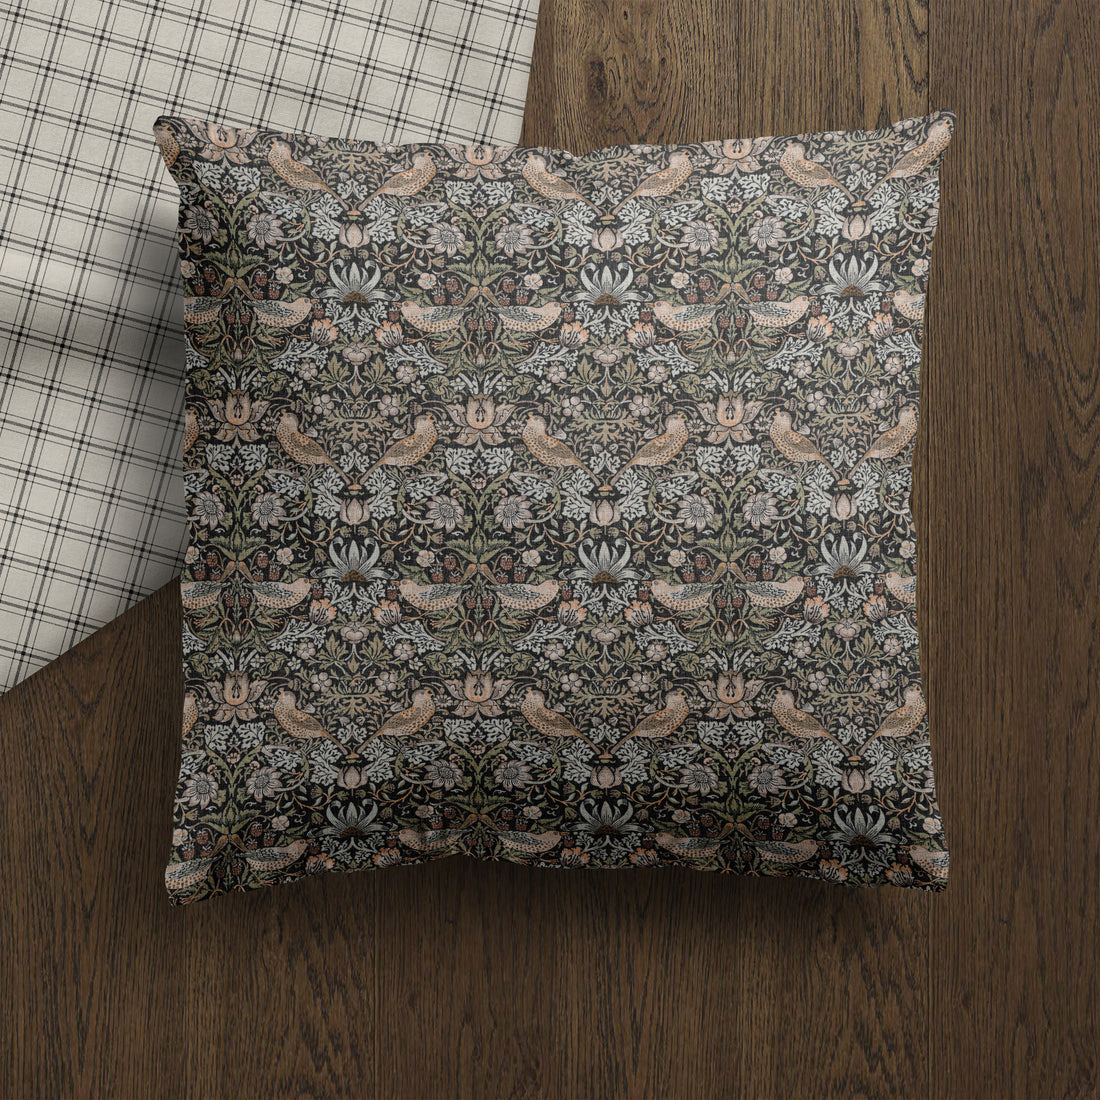 Enchanting Vines II Floral Pillow Cover